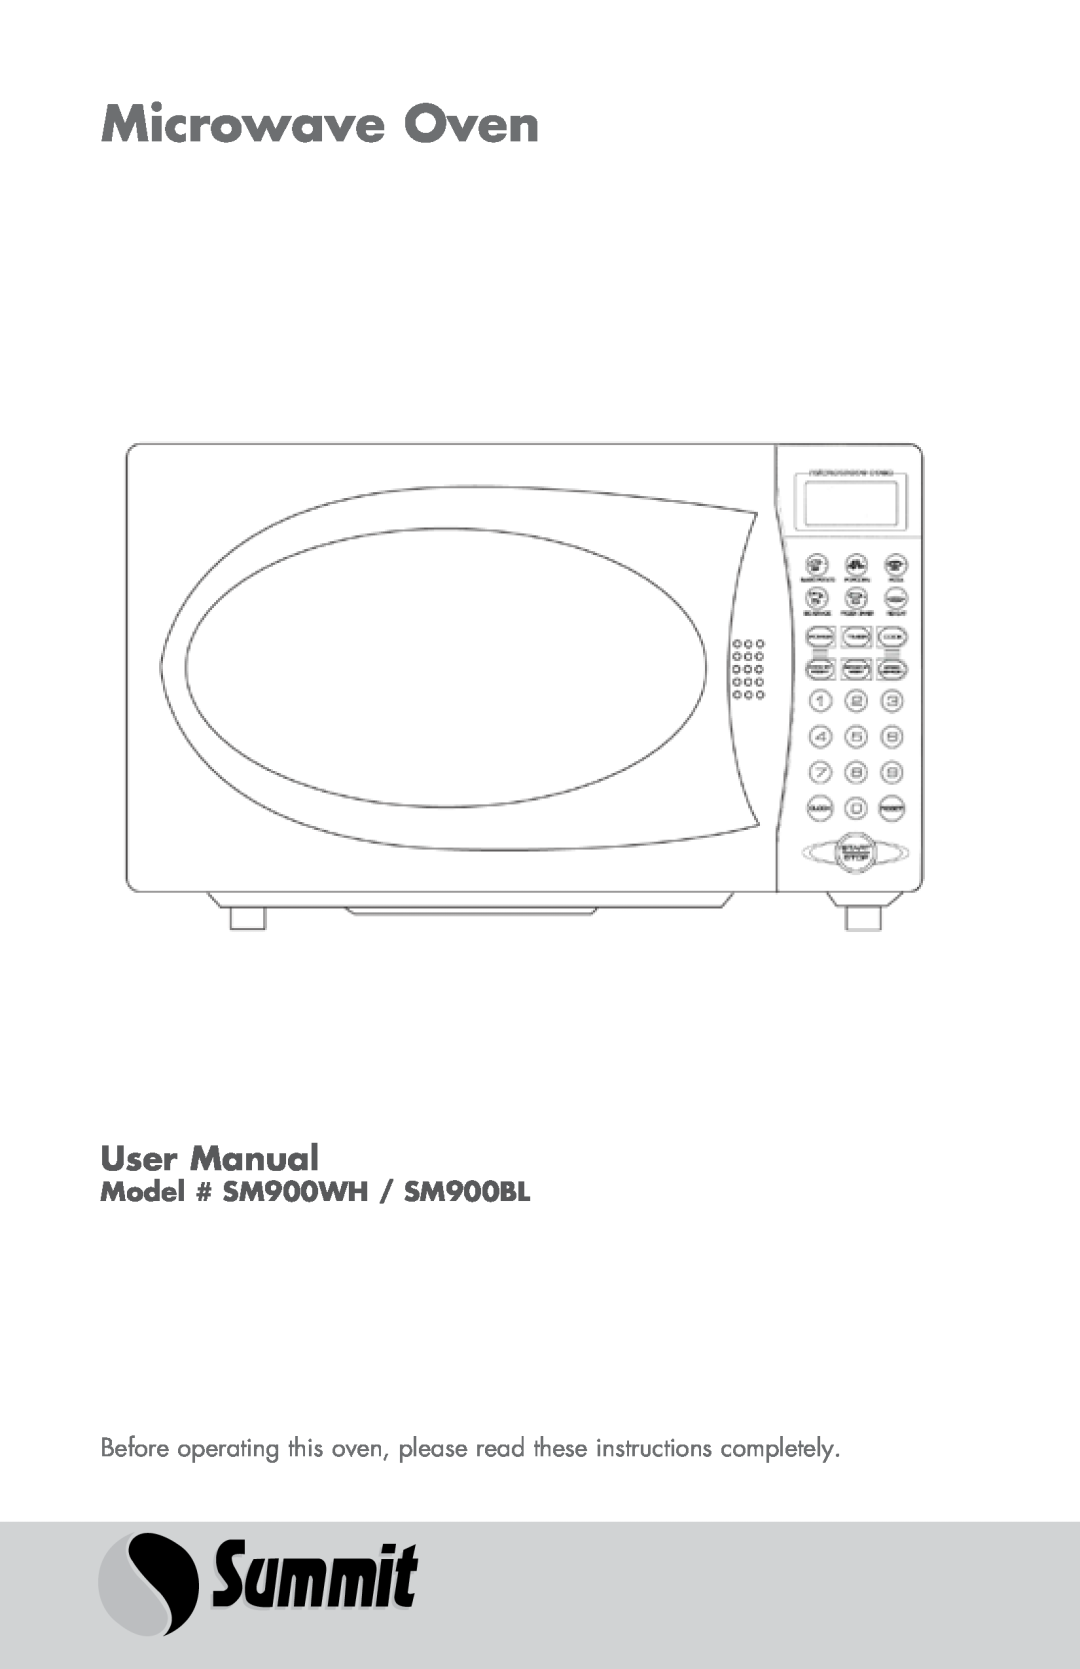 Summit user manual Microwave Oven, User Manual, Model # SM900WH / SM900BL 